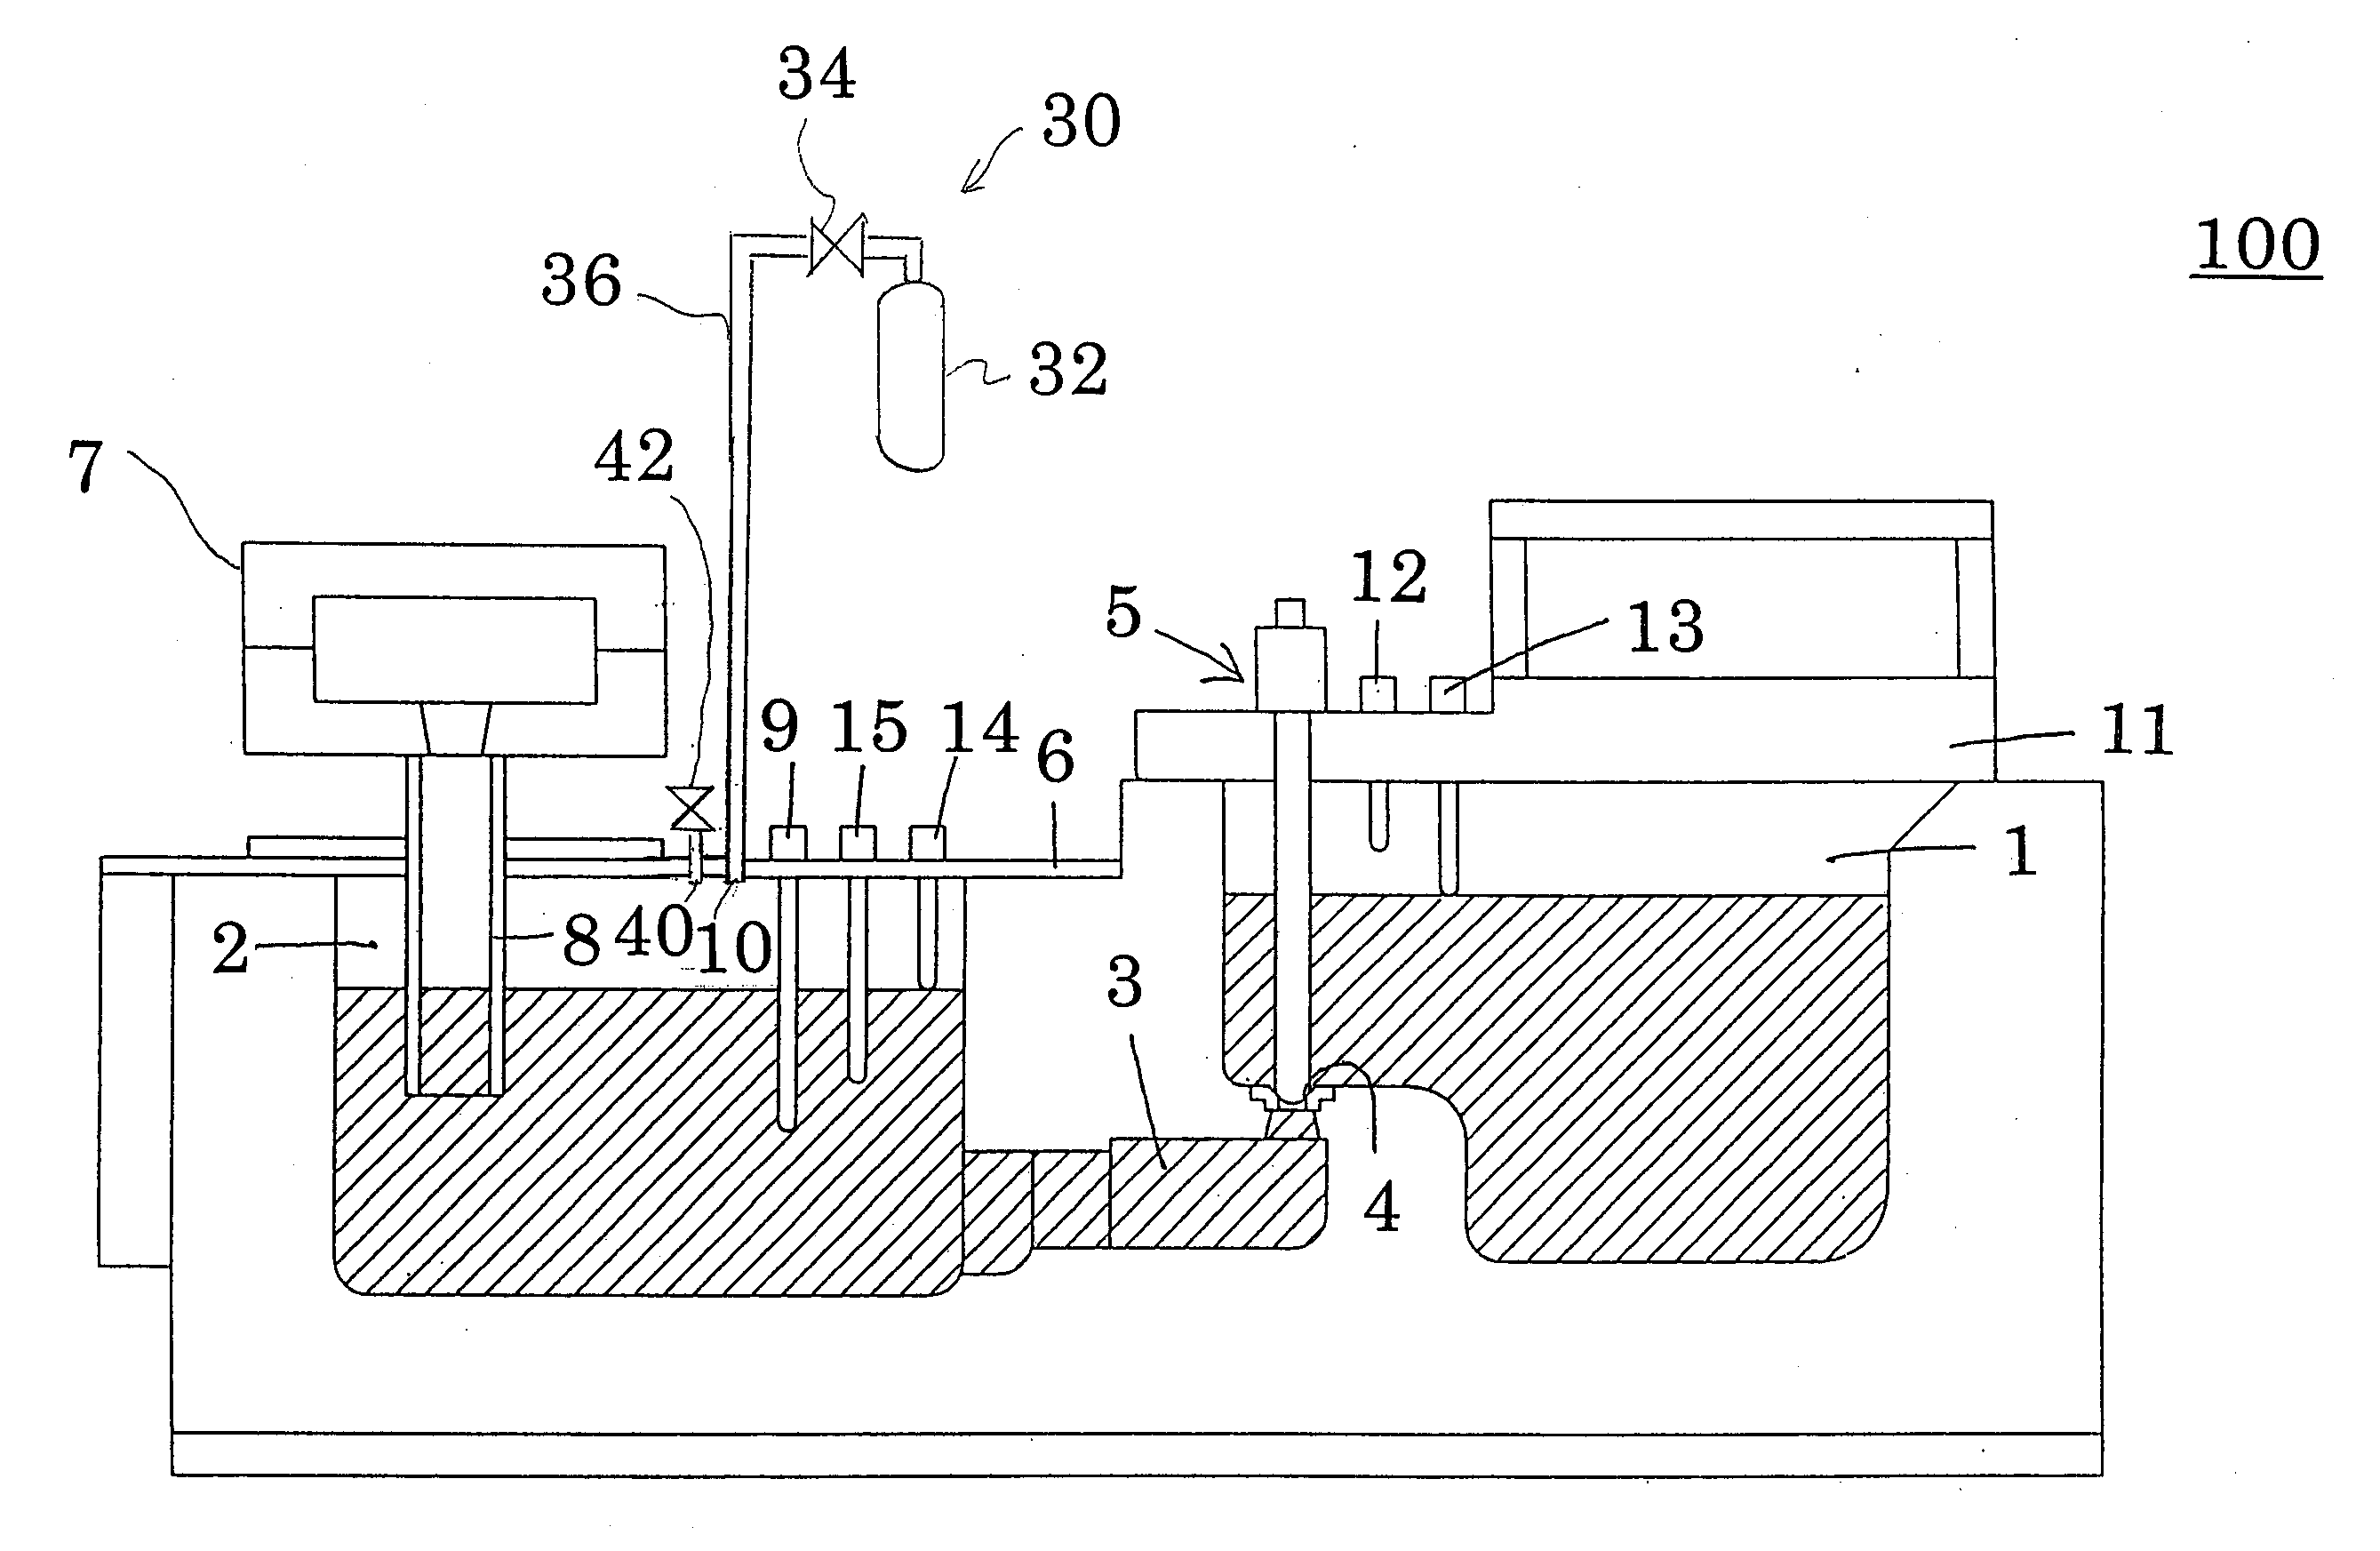 Device for low-pressure casting, a method for filling inert gas in the device, and method for producing a cast